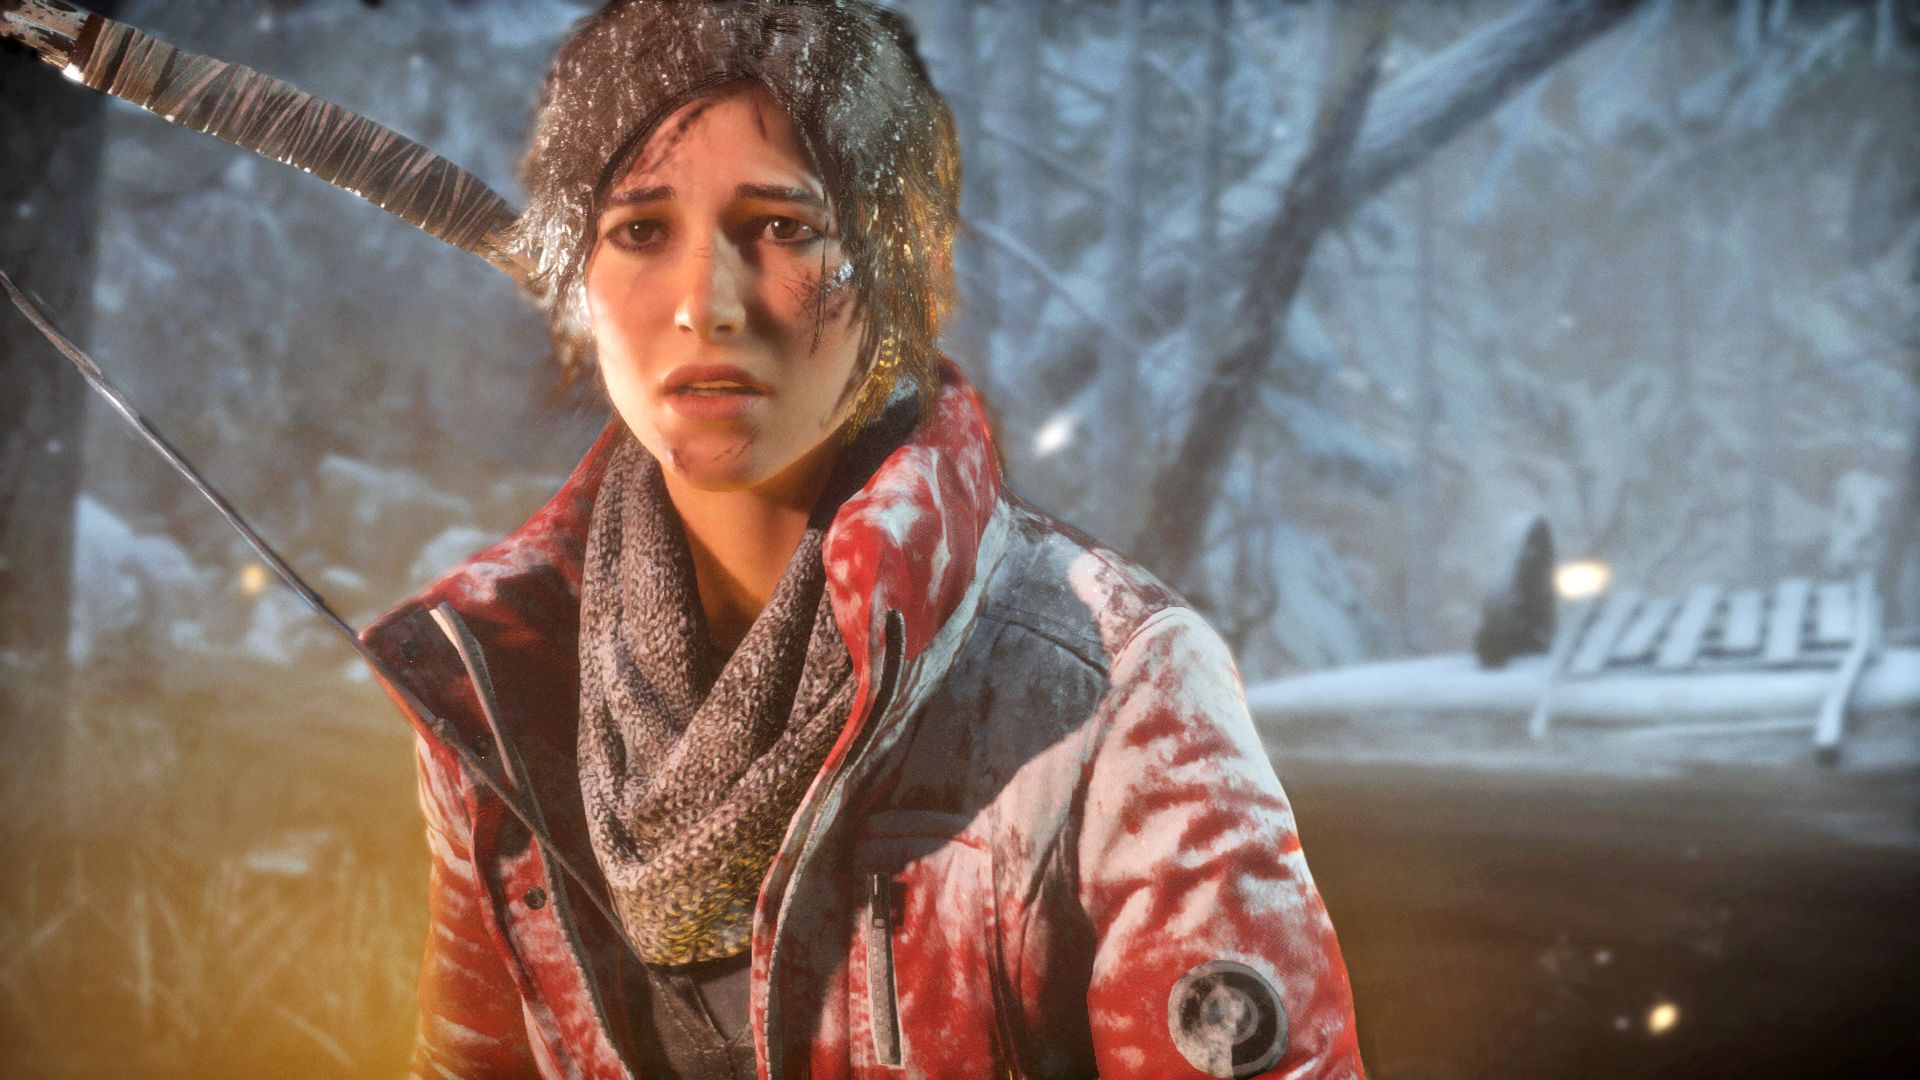 Rise of the Tomb Raider (6)